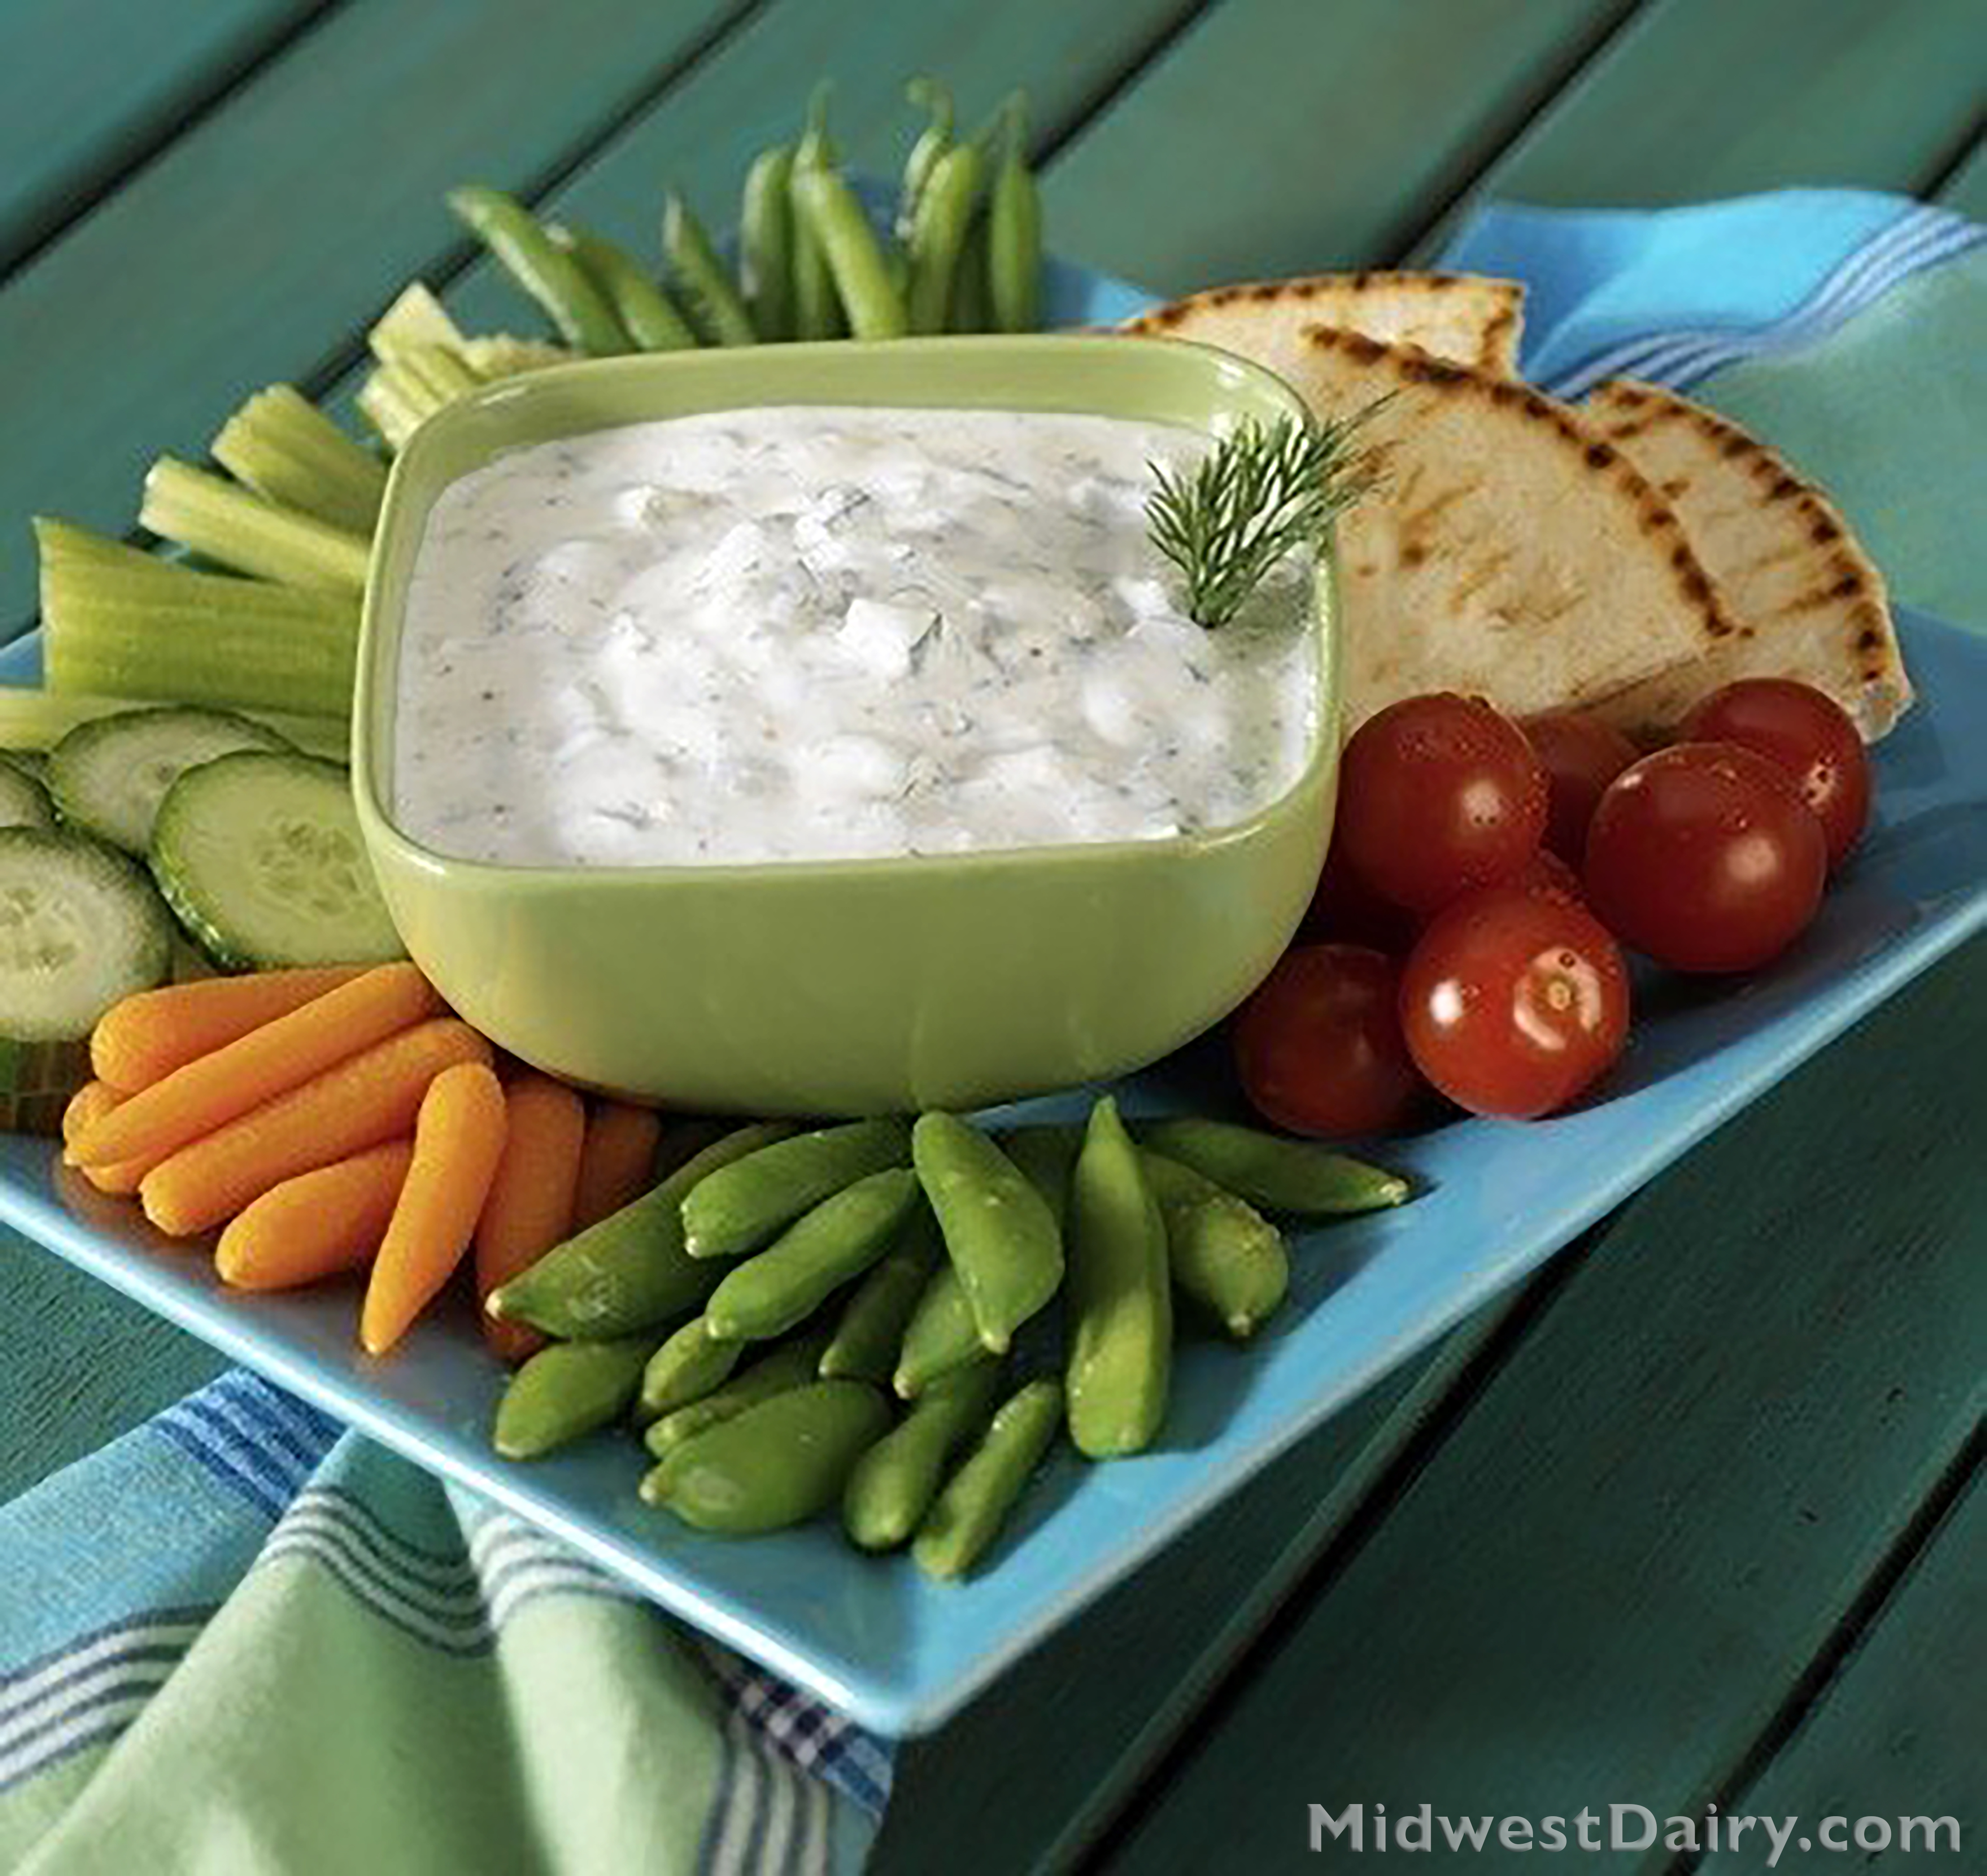 This dip can help you use up veggies and yogurt sitting in your refrigerator. (Photo courtesy of Midwest Dairy Association)